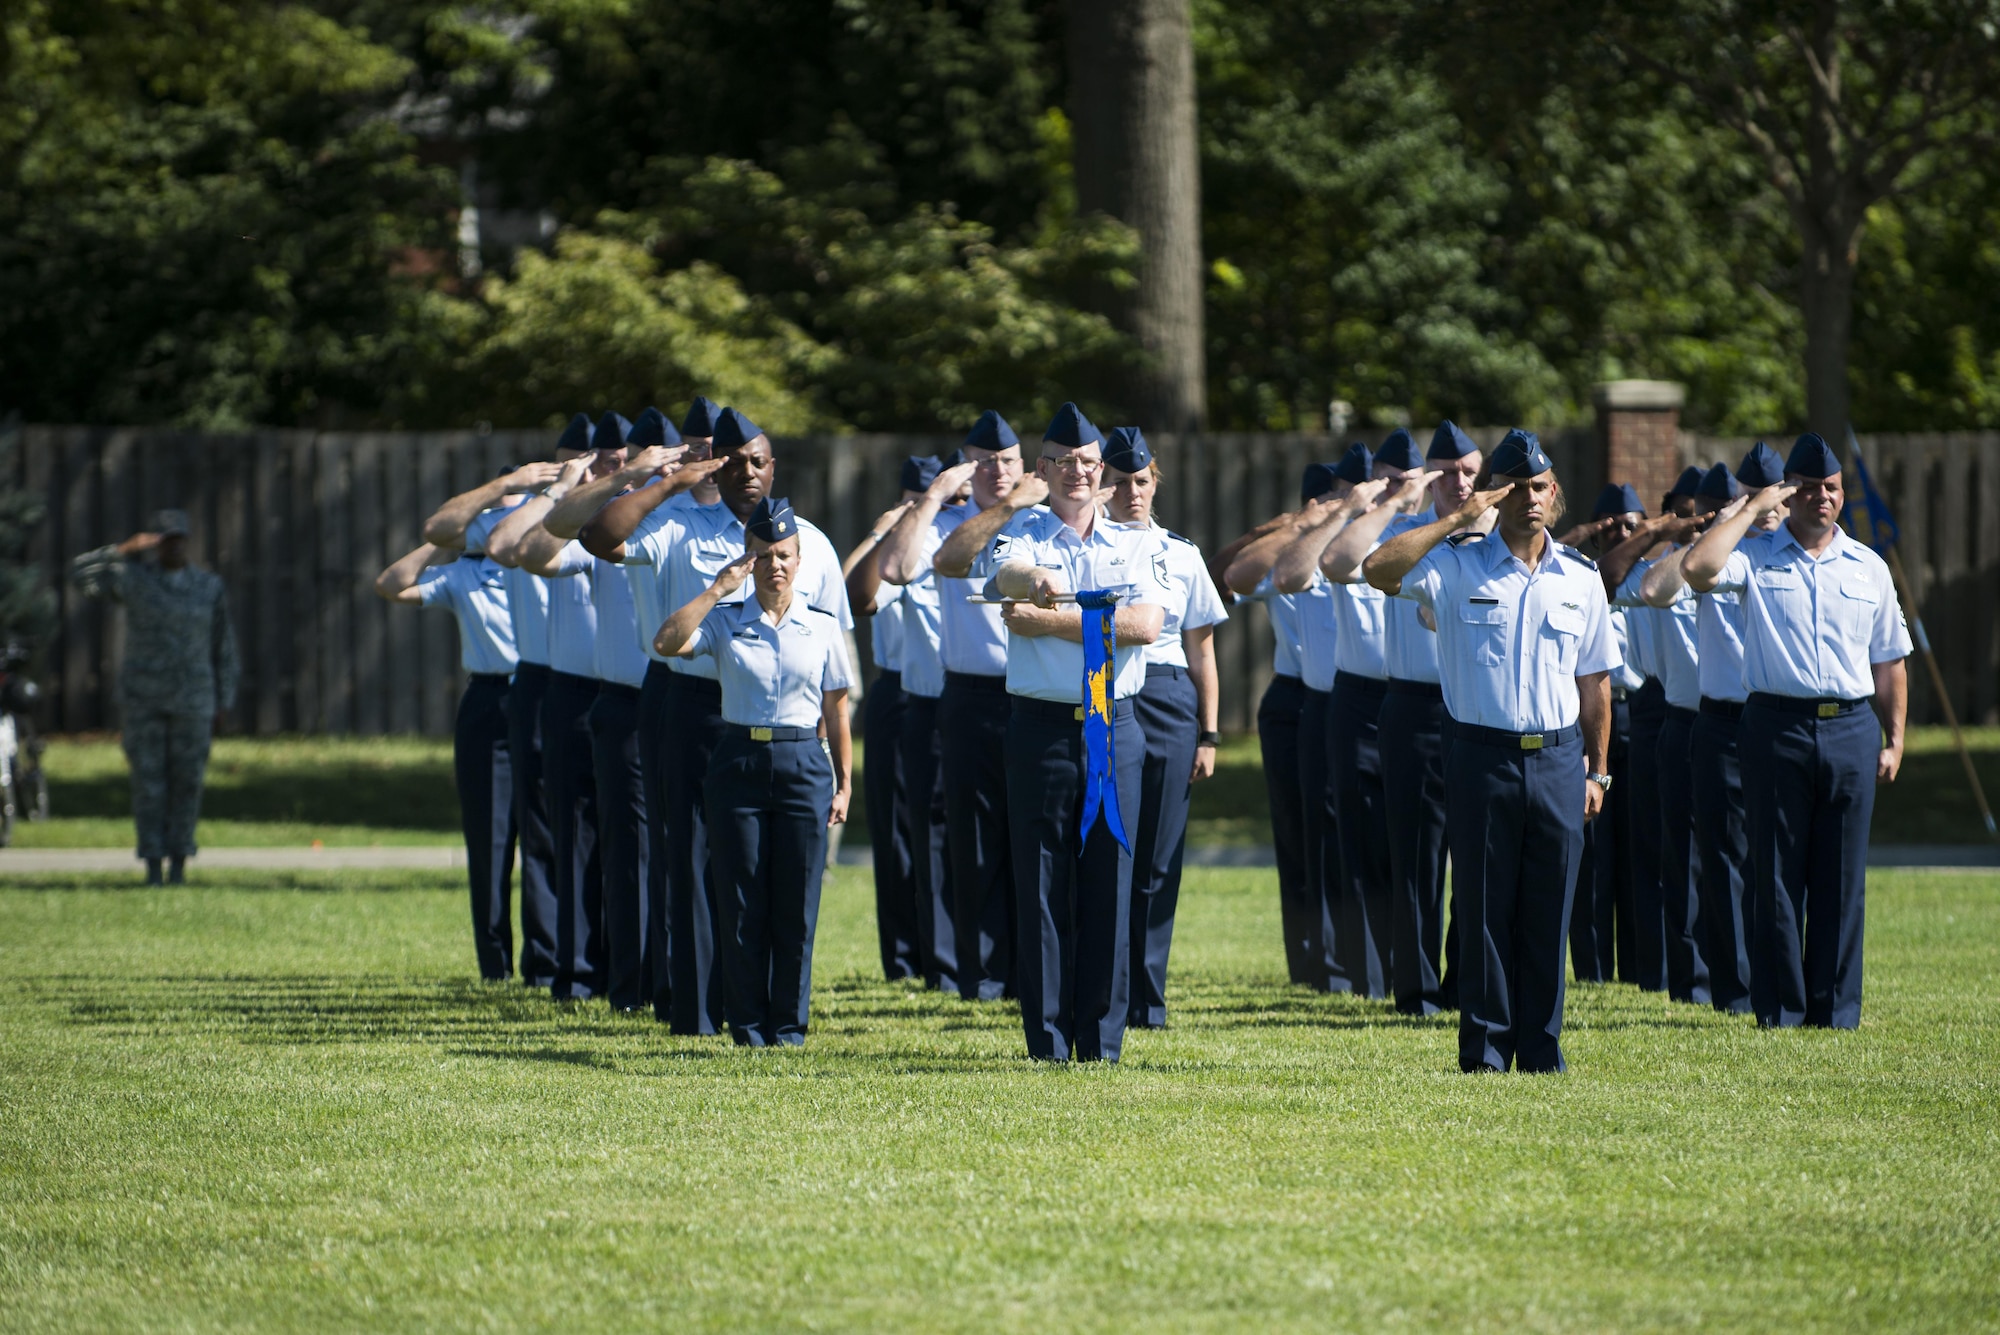 Airmen assigned to Headquarters Air Mobility Command, located at Scott Air Force Base, Ill., stand in formation during the AMC change of command ceremony Aug. 11, 2015. Gen. Carlton D. Everhart II assumed command of AMC from Gen. Darren W. McDew, who will be the new commander of U.S. Transportation Command. (U.S. Air Force photo/Staff Sgt. Clayton Lenhardt)